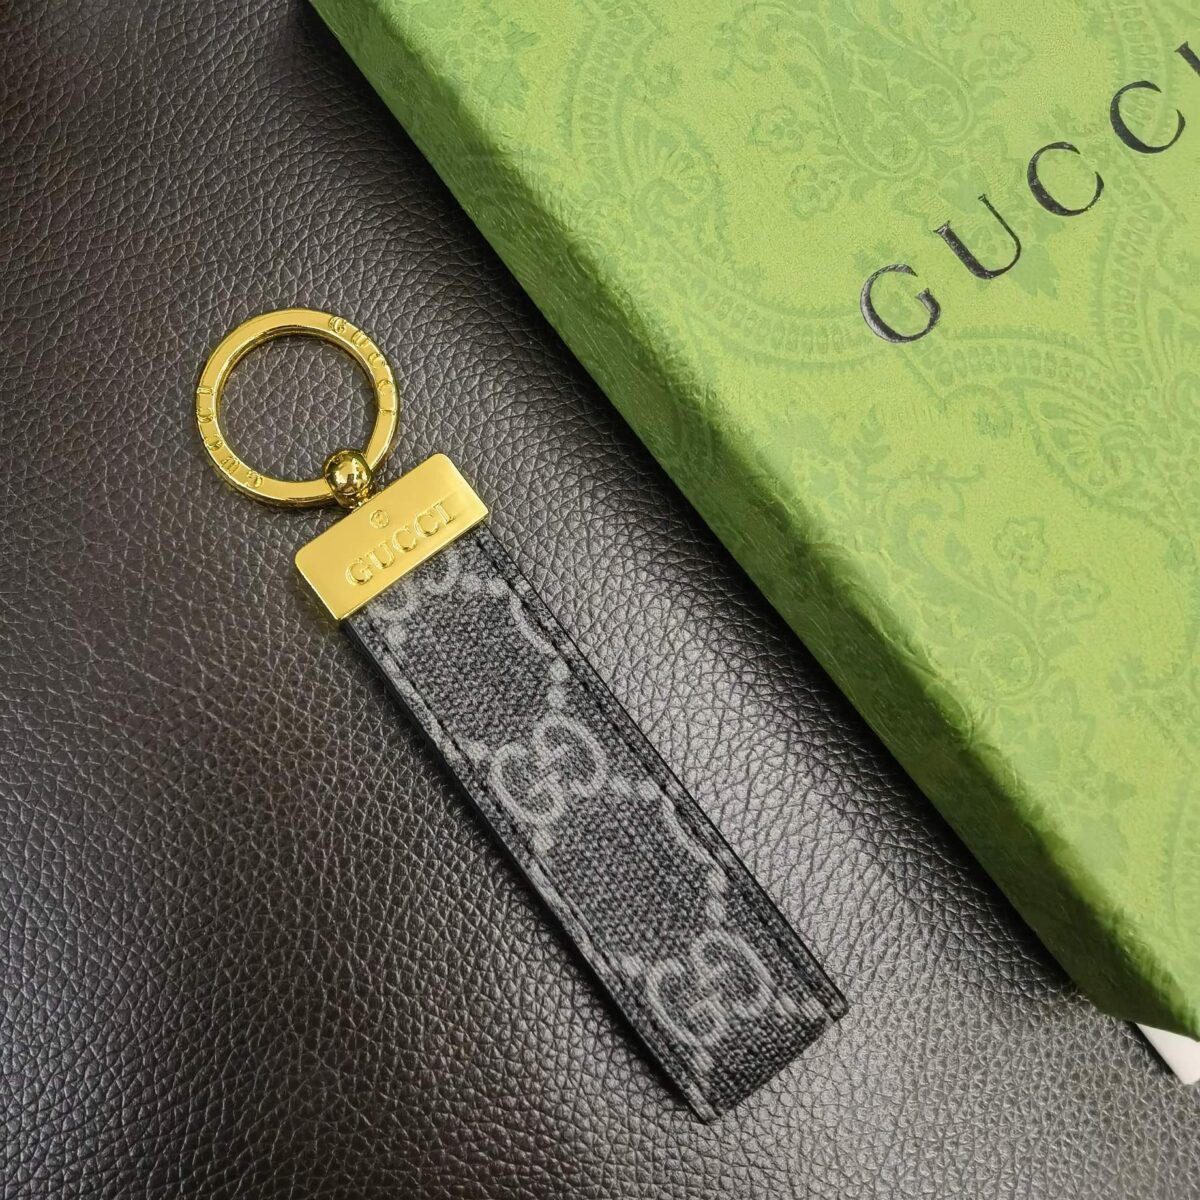 Luxury key chains by Gucci, featuring premium materials and iconic brand detailing.